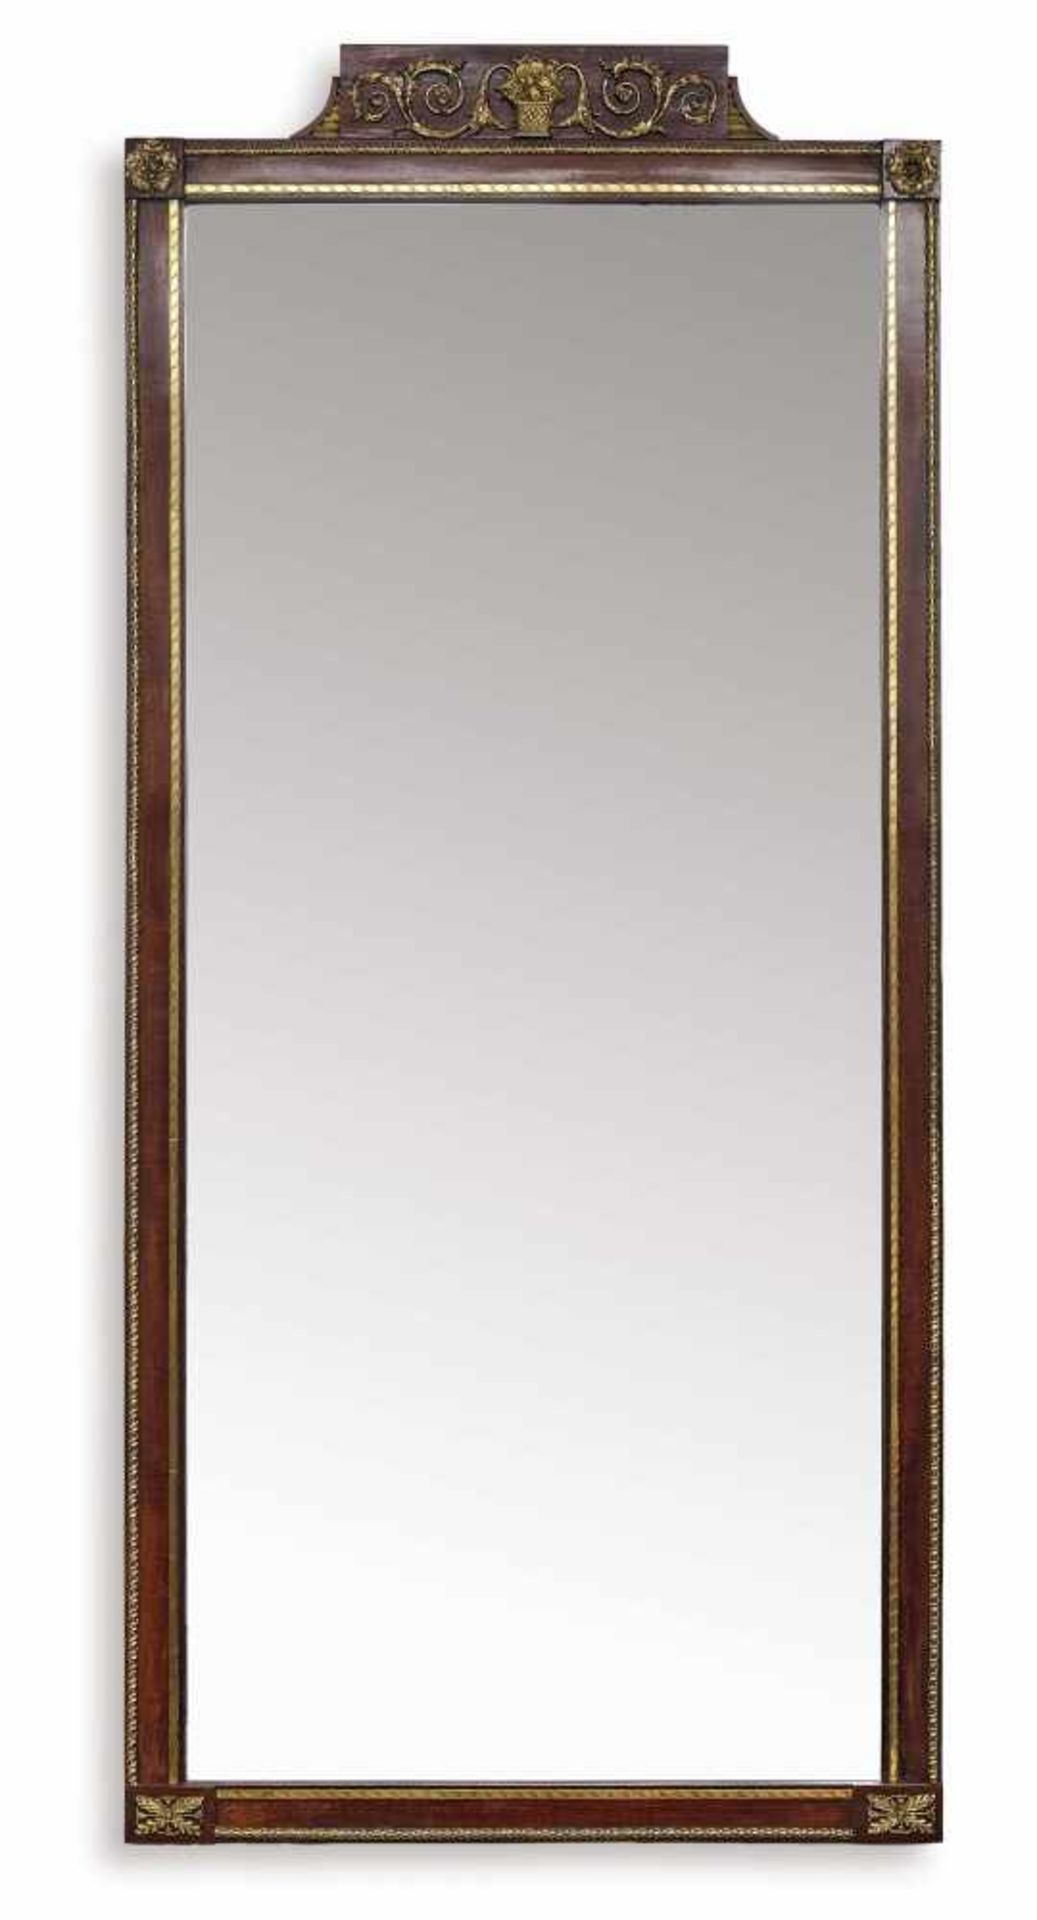 A mirrorRussia, 19th century Mahogany. Wood, painted in gold. Brass mounts. Fitting decor. Restored.